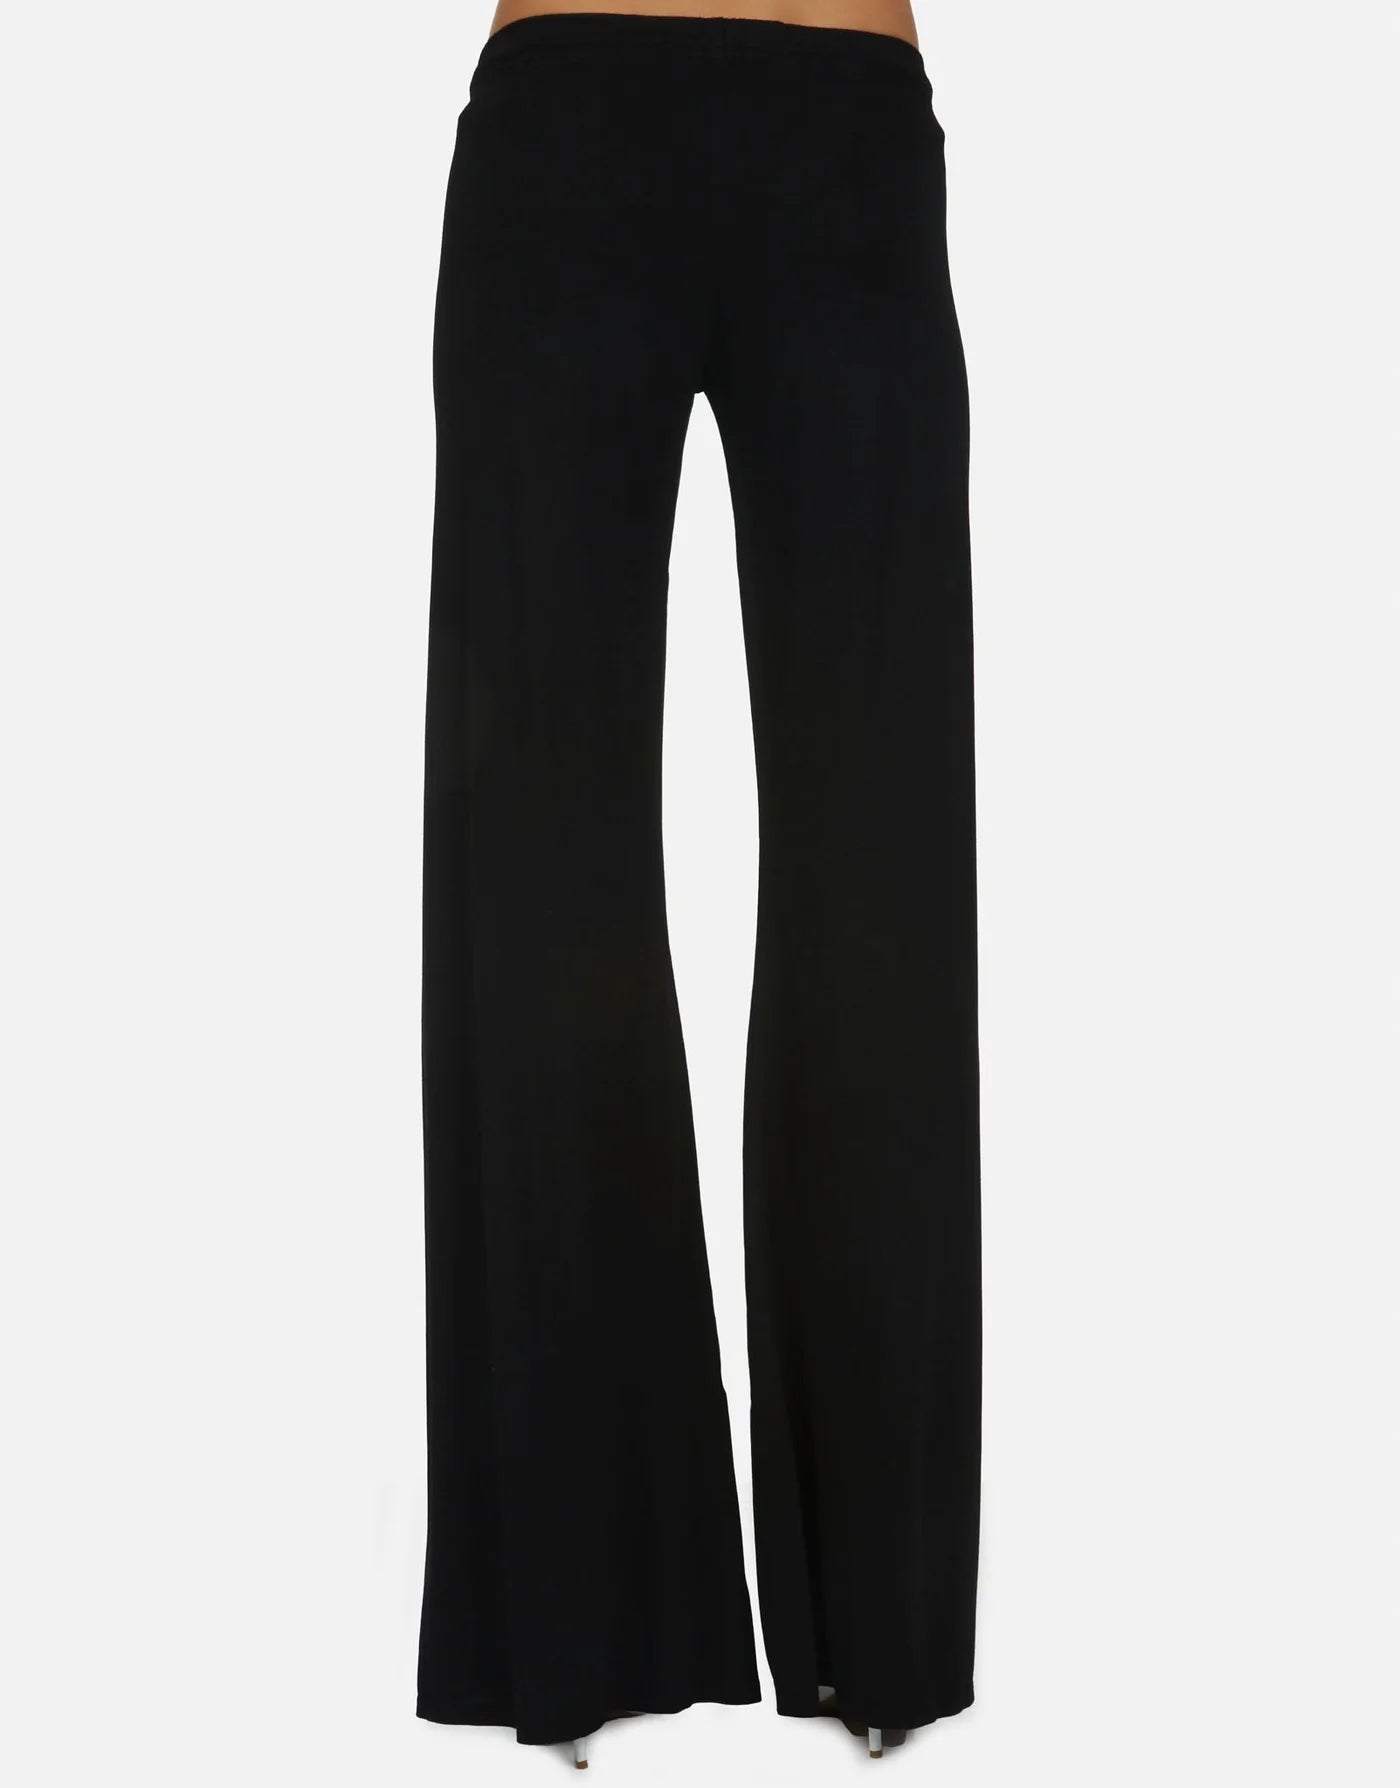 Derby Wide Leg Pant - Something about Sofia